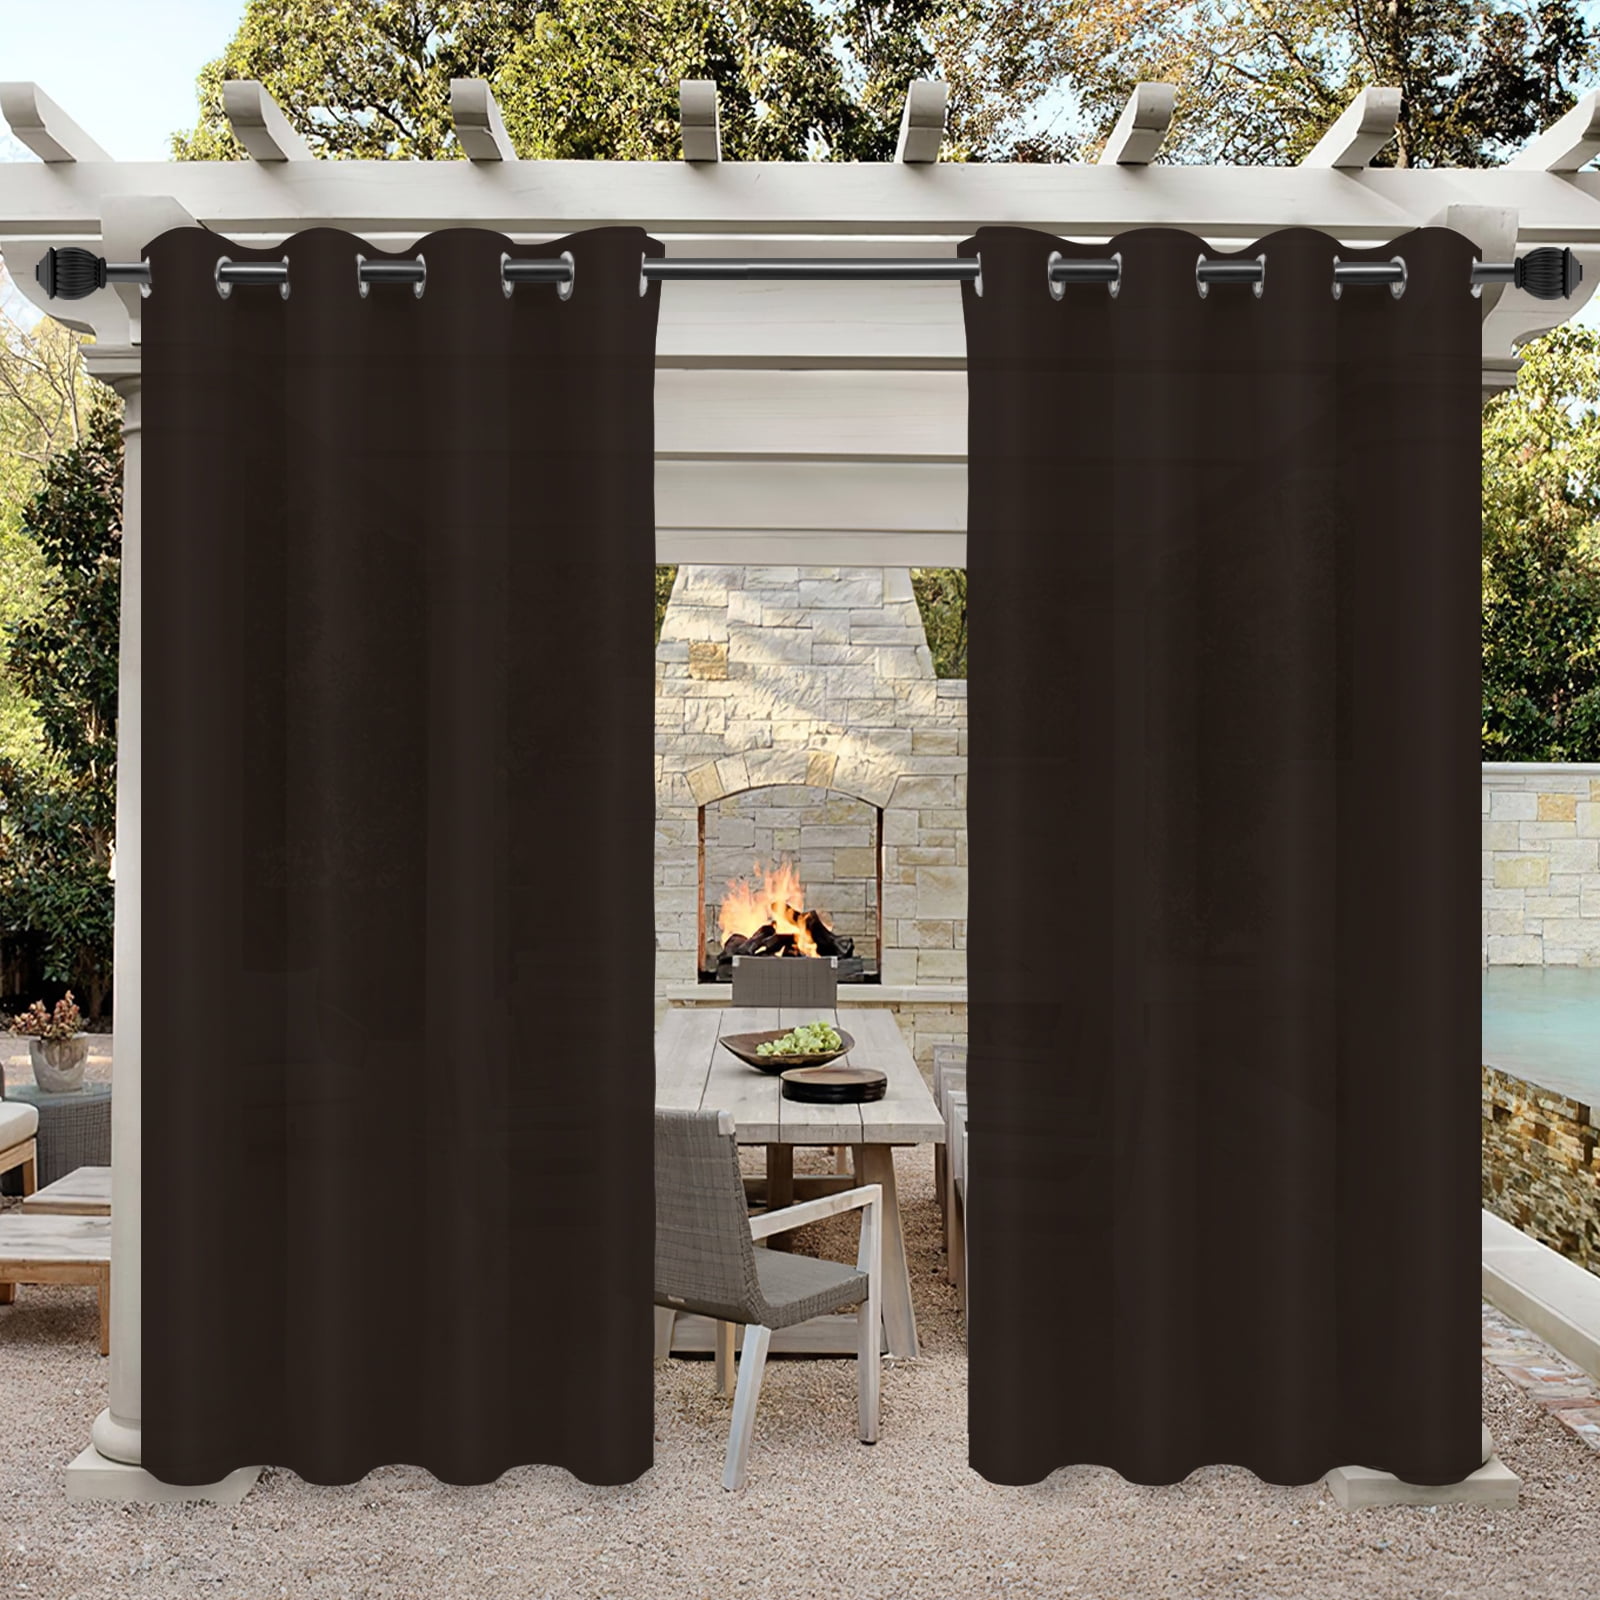 Grey 1 Pc PONY DANCE Outdoor Drapes Blackout Home Decor Light Blocking Fade Resistant Curtain Panels with Grommet Rust-Proof 52-inch Wide by 108-inch Long